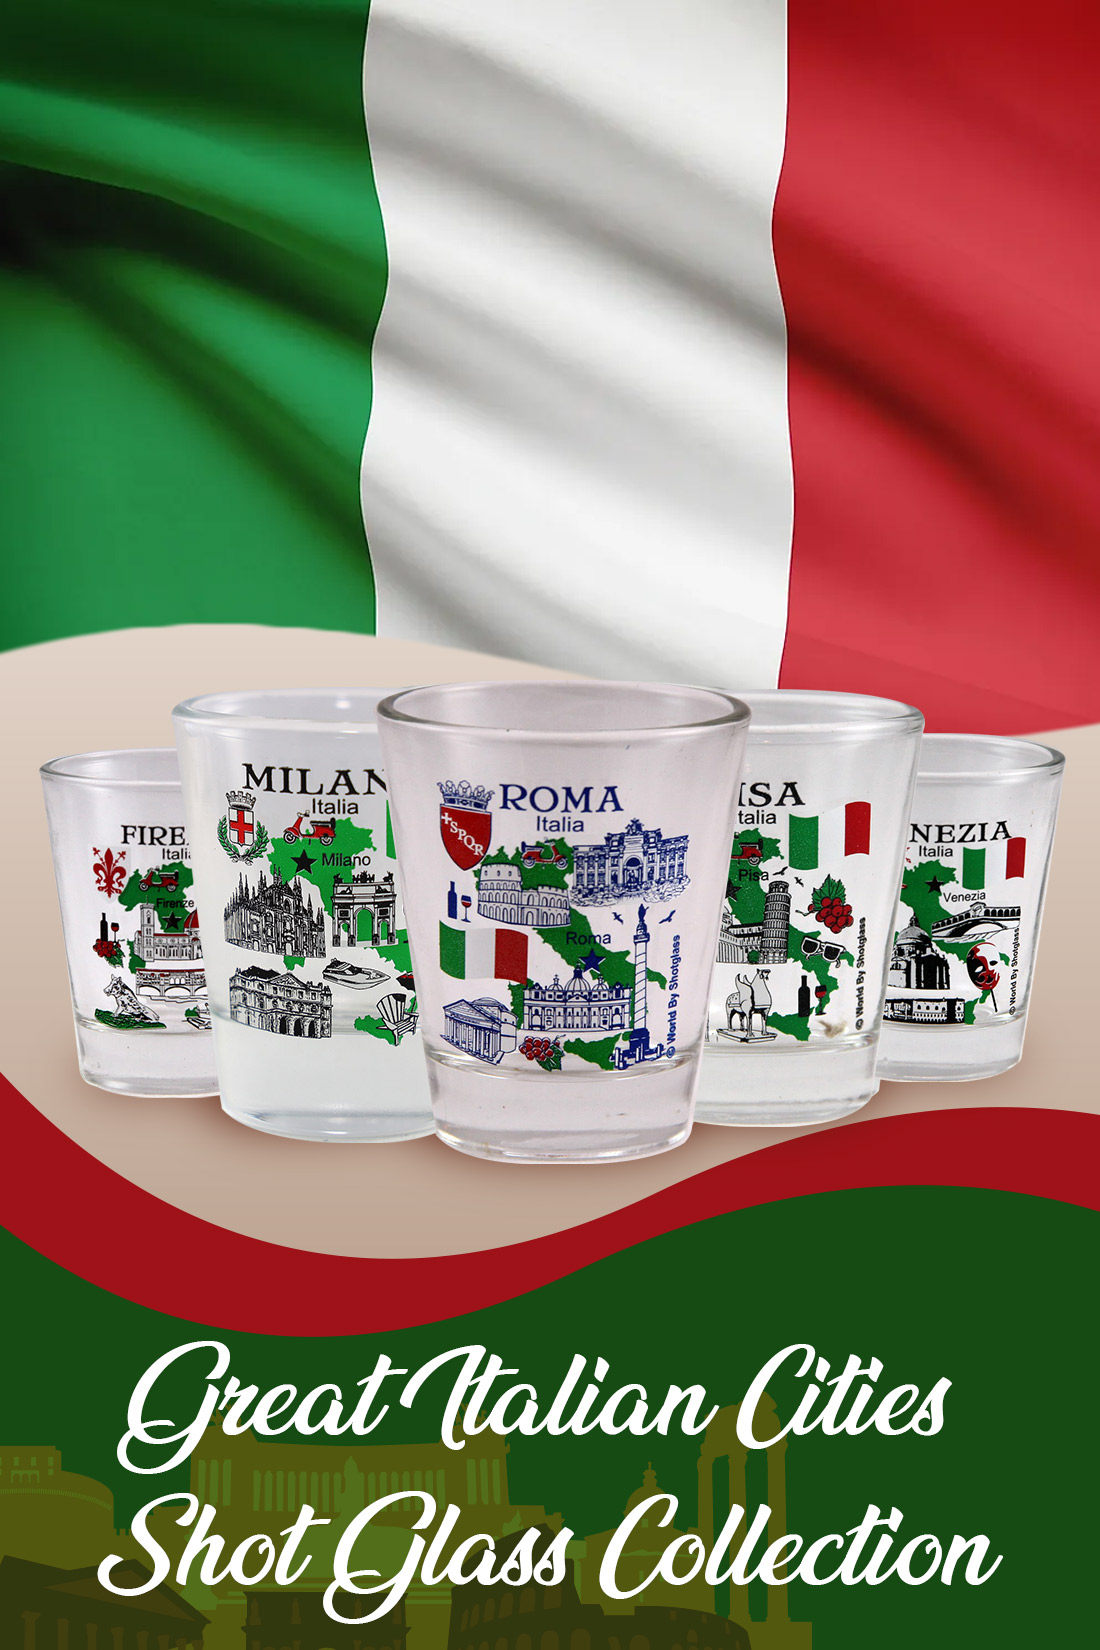 Great Italian Cities Shot Glass Collection